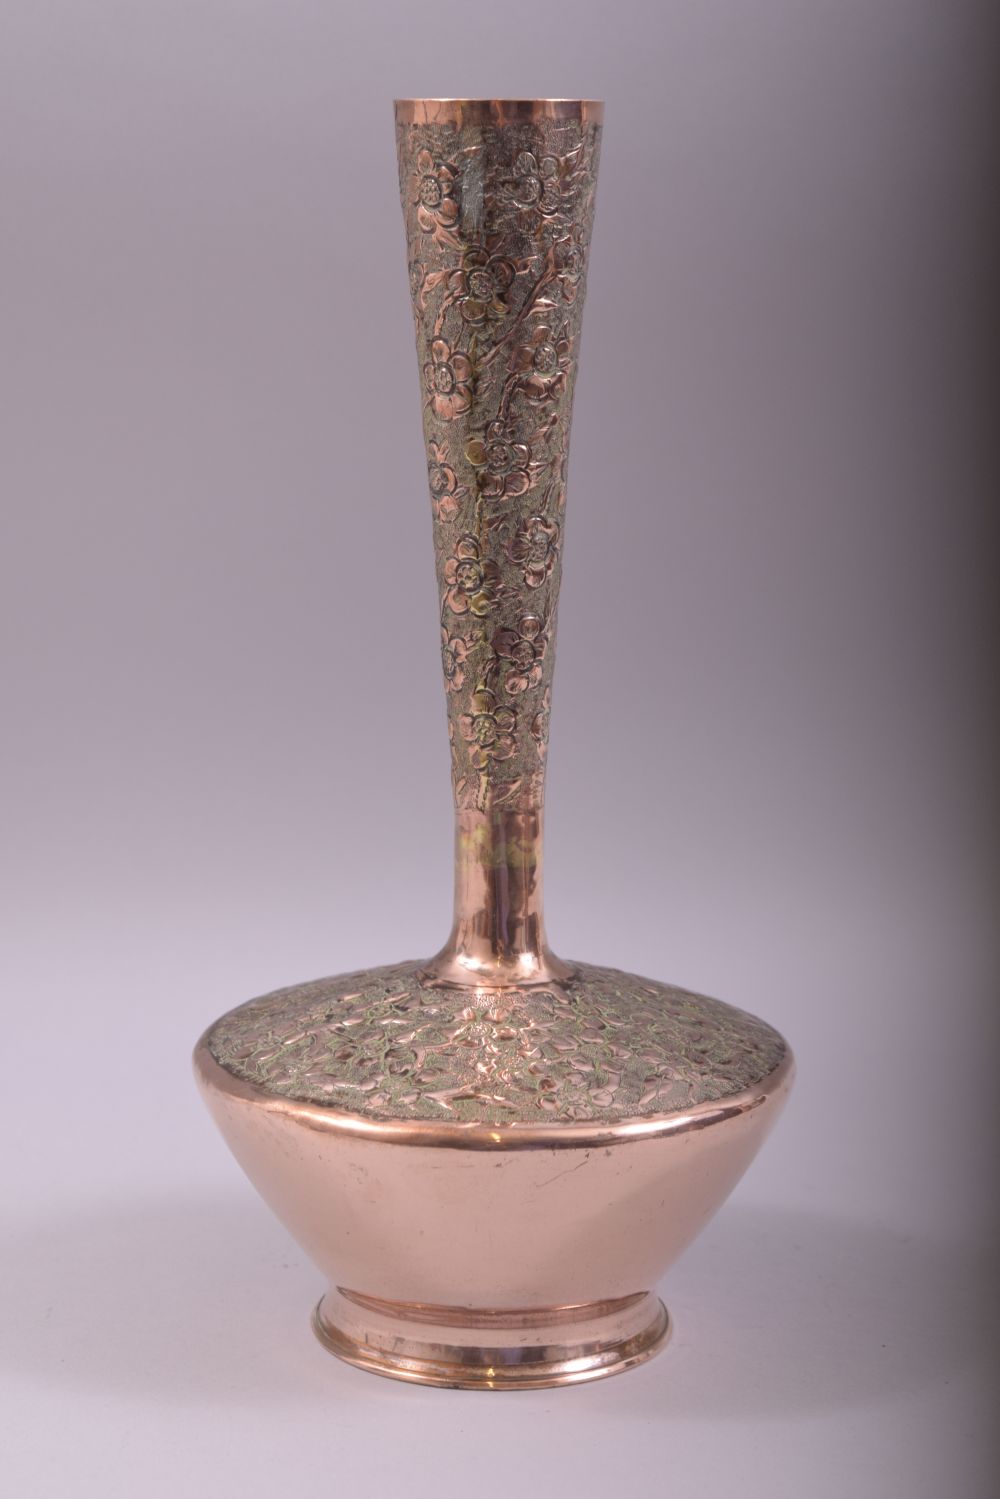 THREE PIECES OF EASTERN METALWARE, comprising of a tall neck copper vase with embossed and chased - Image 3 of 6